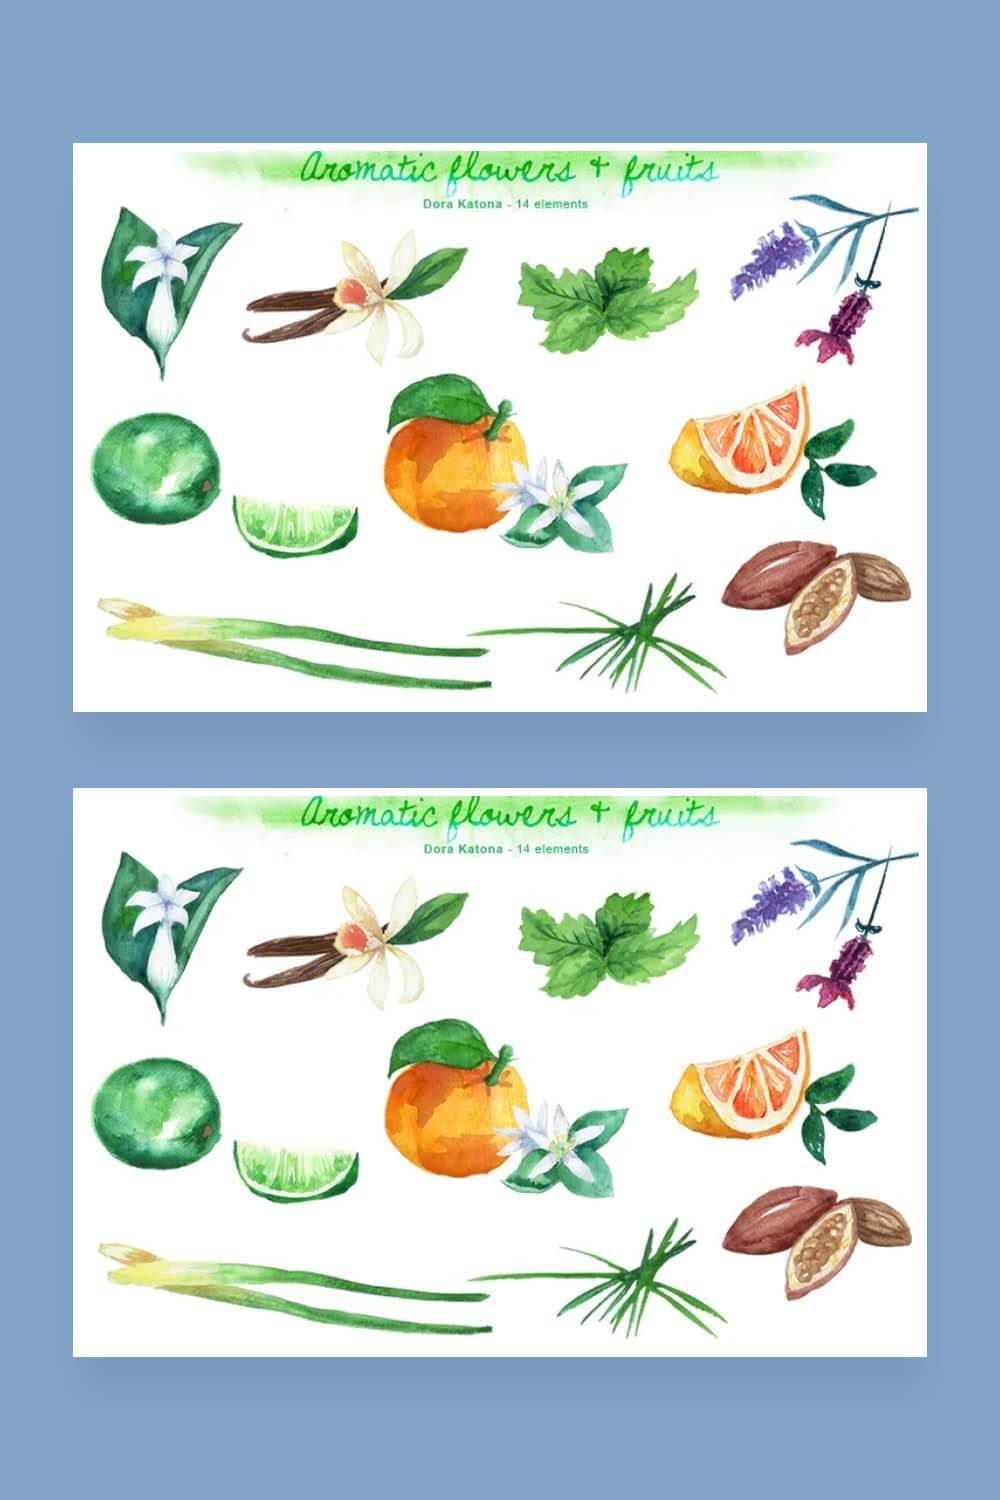 Picture with aromatic plants and fruits set for Pinterest.